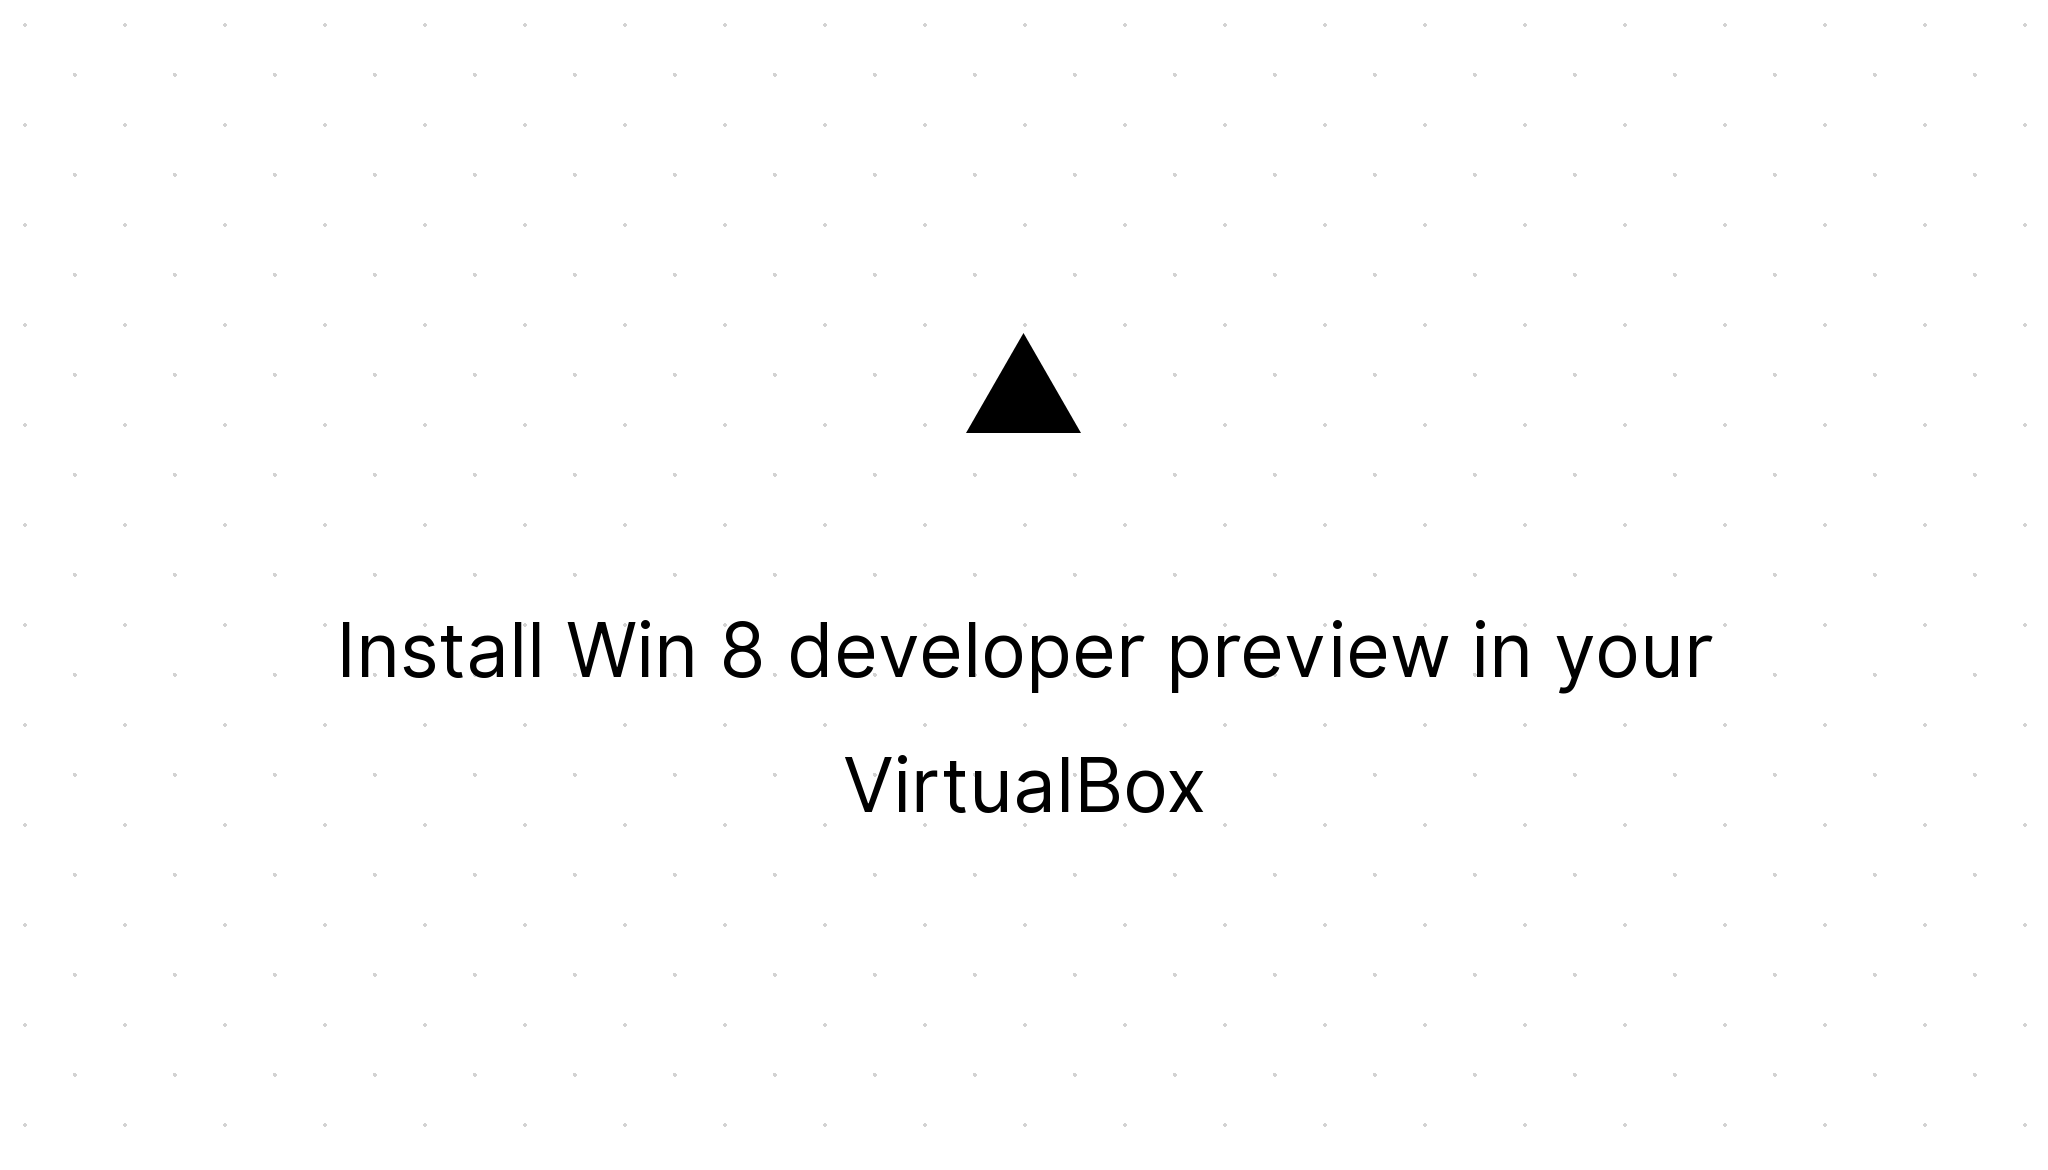 Cover Image for Install Win 8 developer preview in your VirtualBox